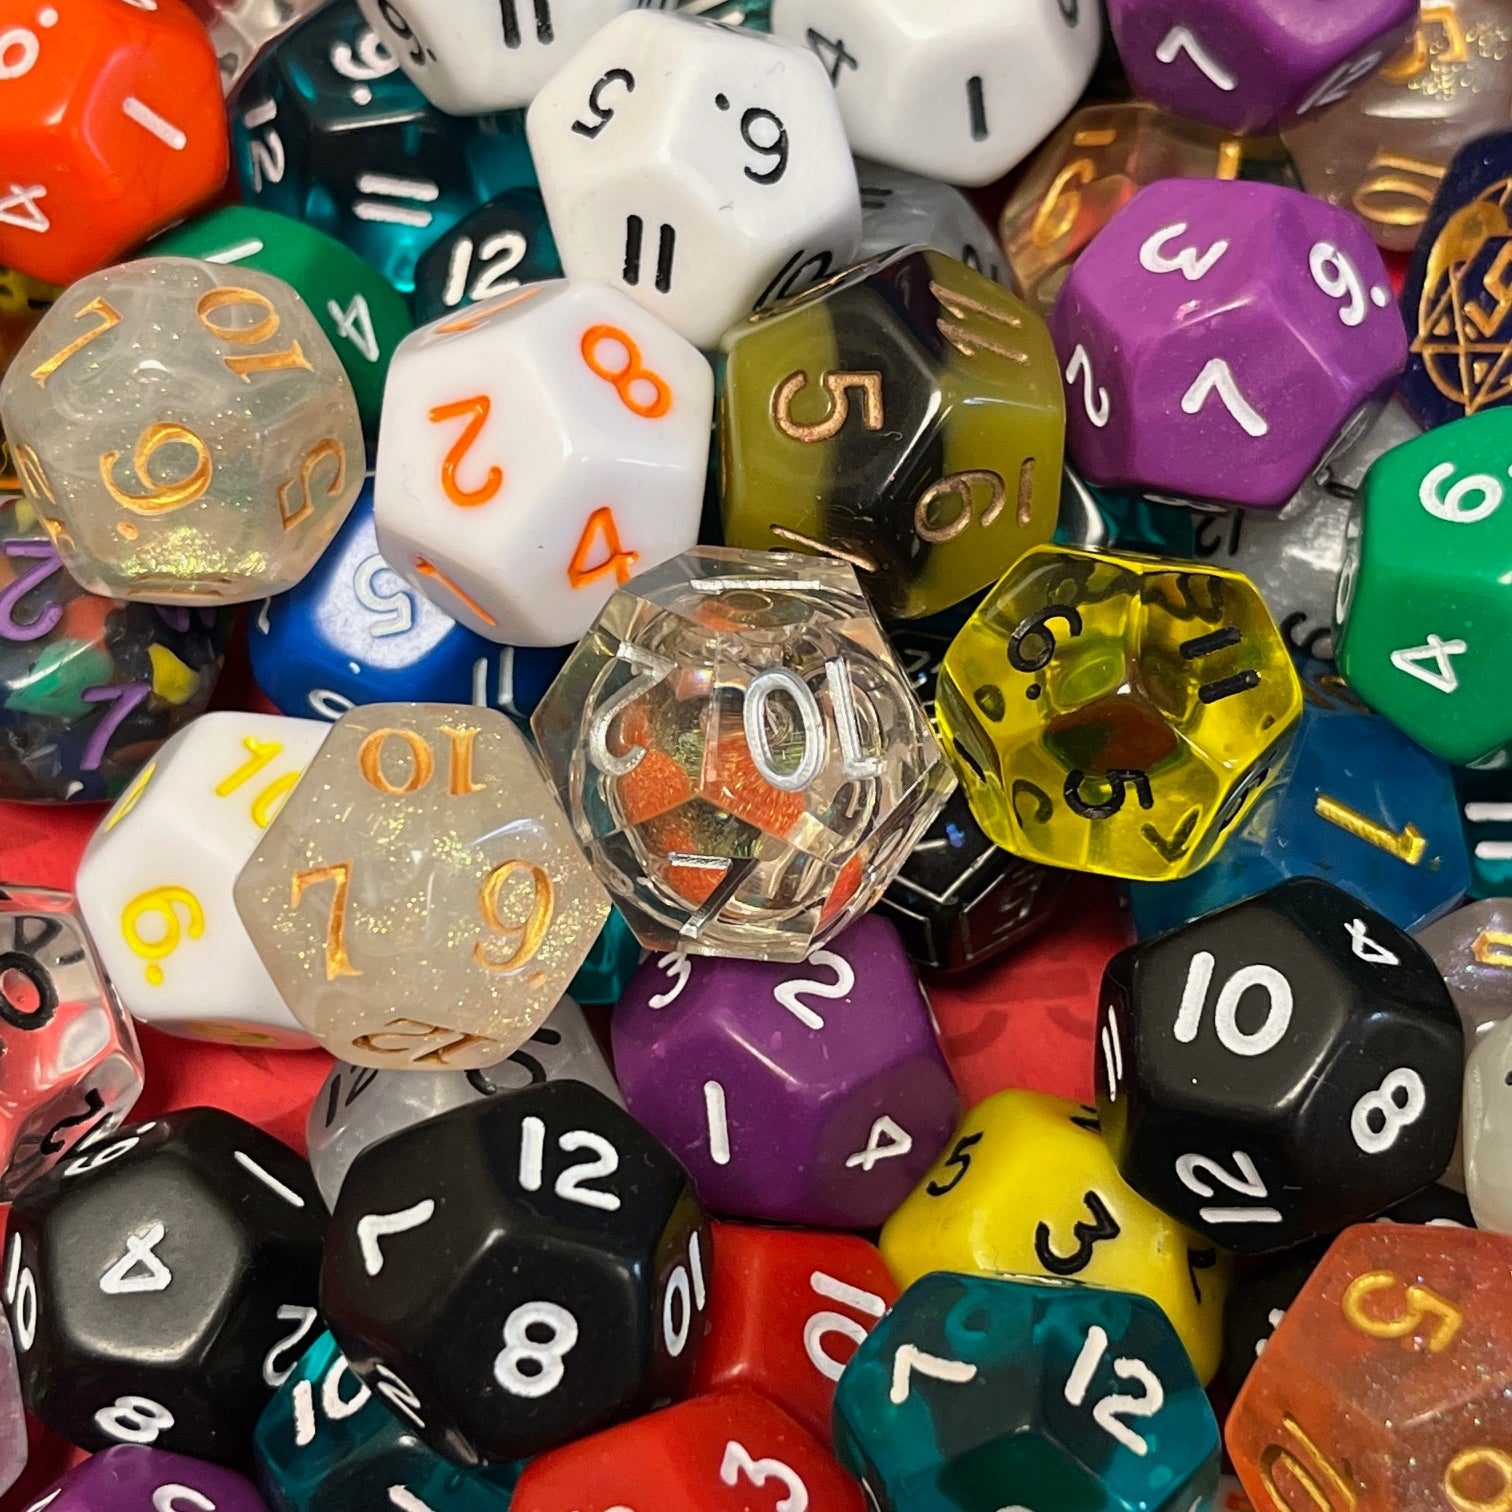 Random D12 TTRPG dice sets for DND and role playing games and dice goblin collectors